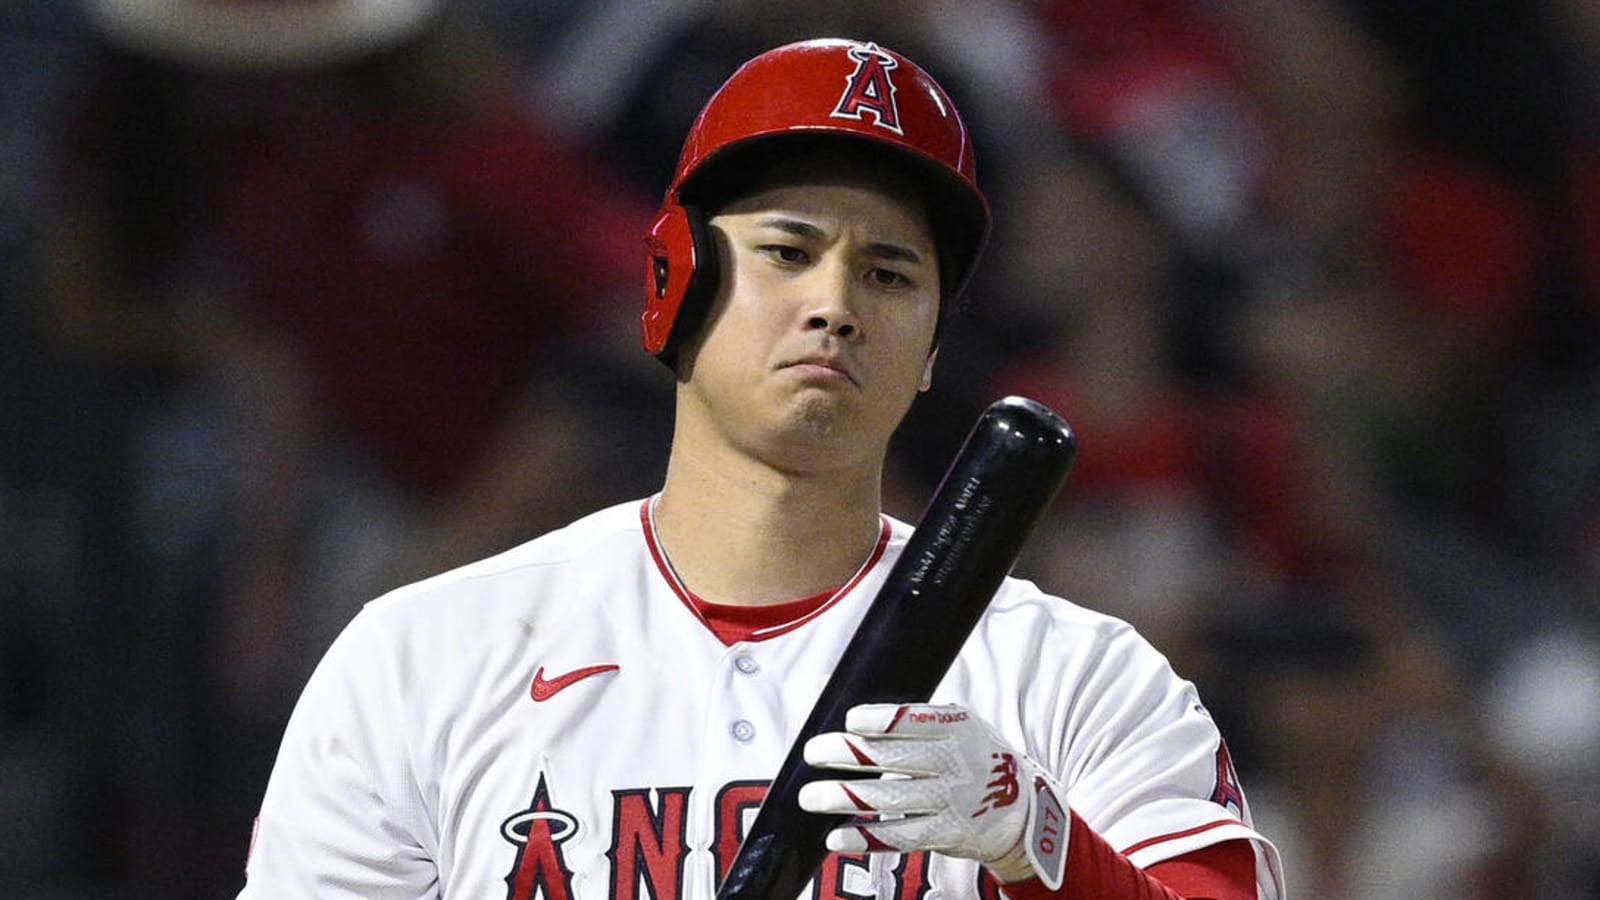 Angels' Mike Trout offers opinion on Shohei Ohtani's future